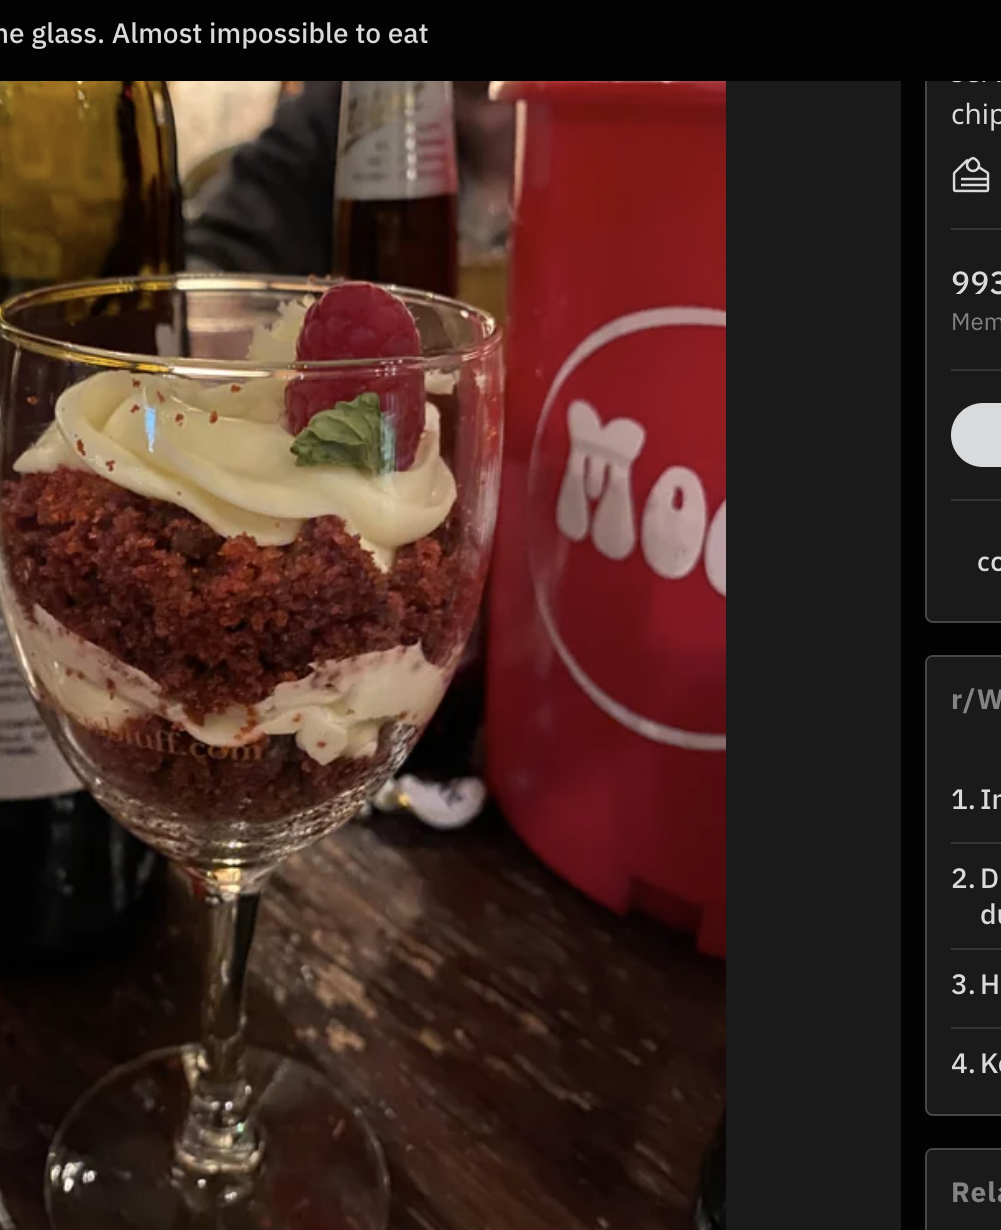 A &quot;slice&quot; of red velvet cake is inside a wine glass